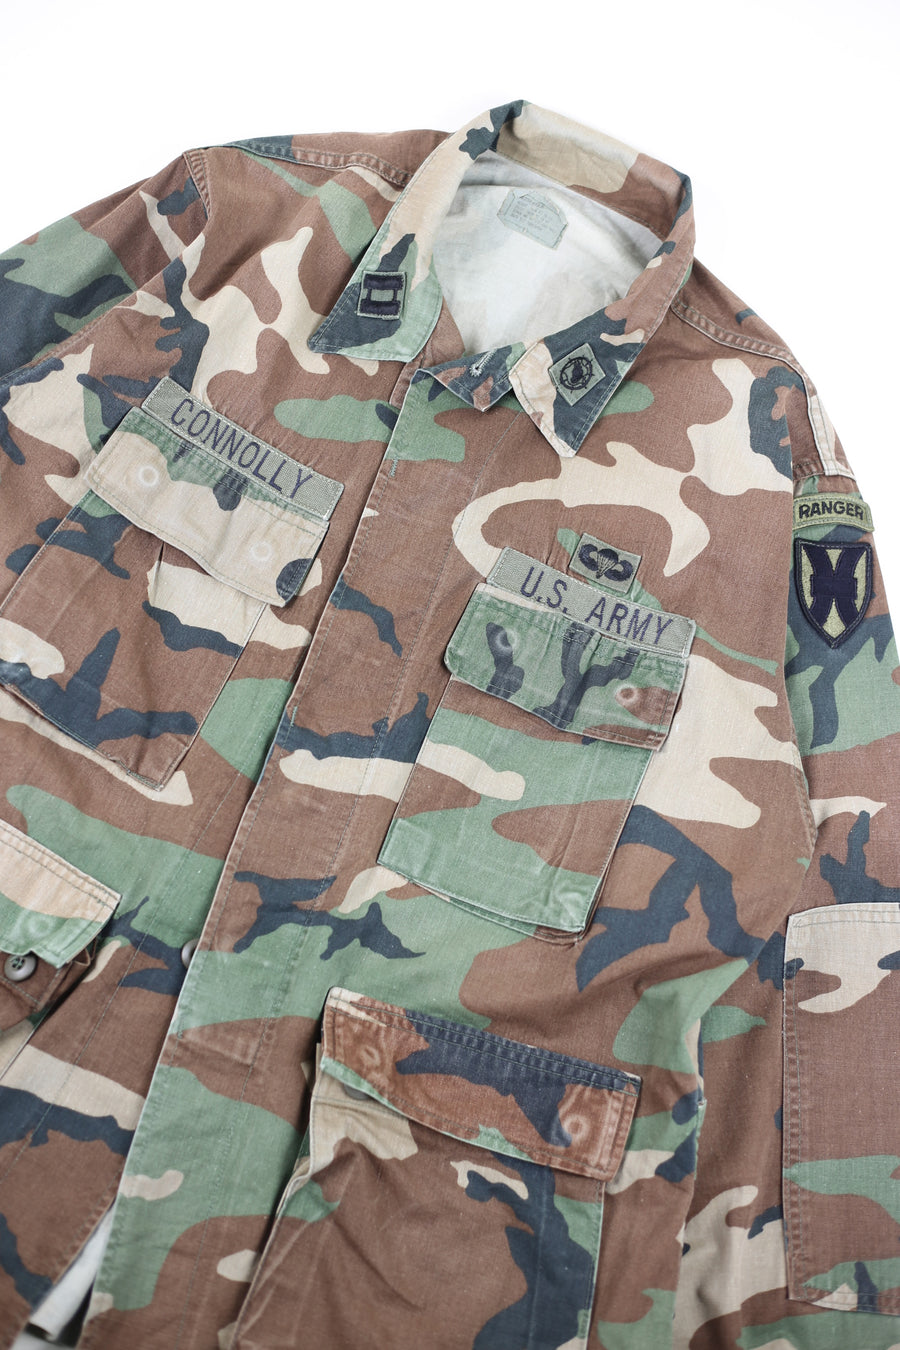 Giacca camouflage BDU WOODLAND  Us Army -  L  -